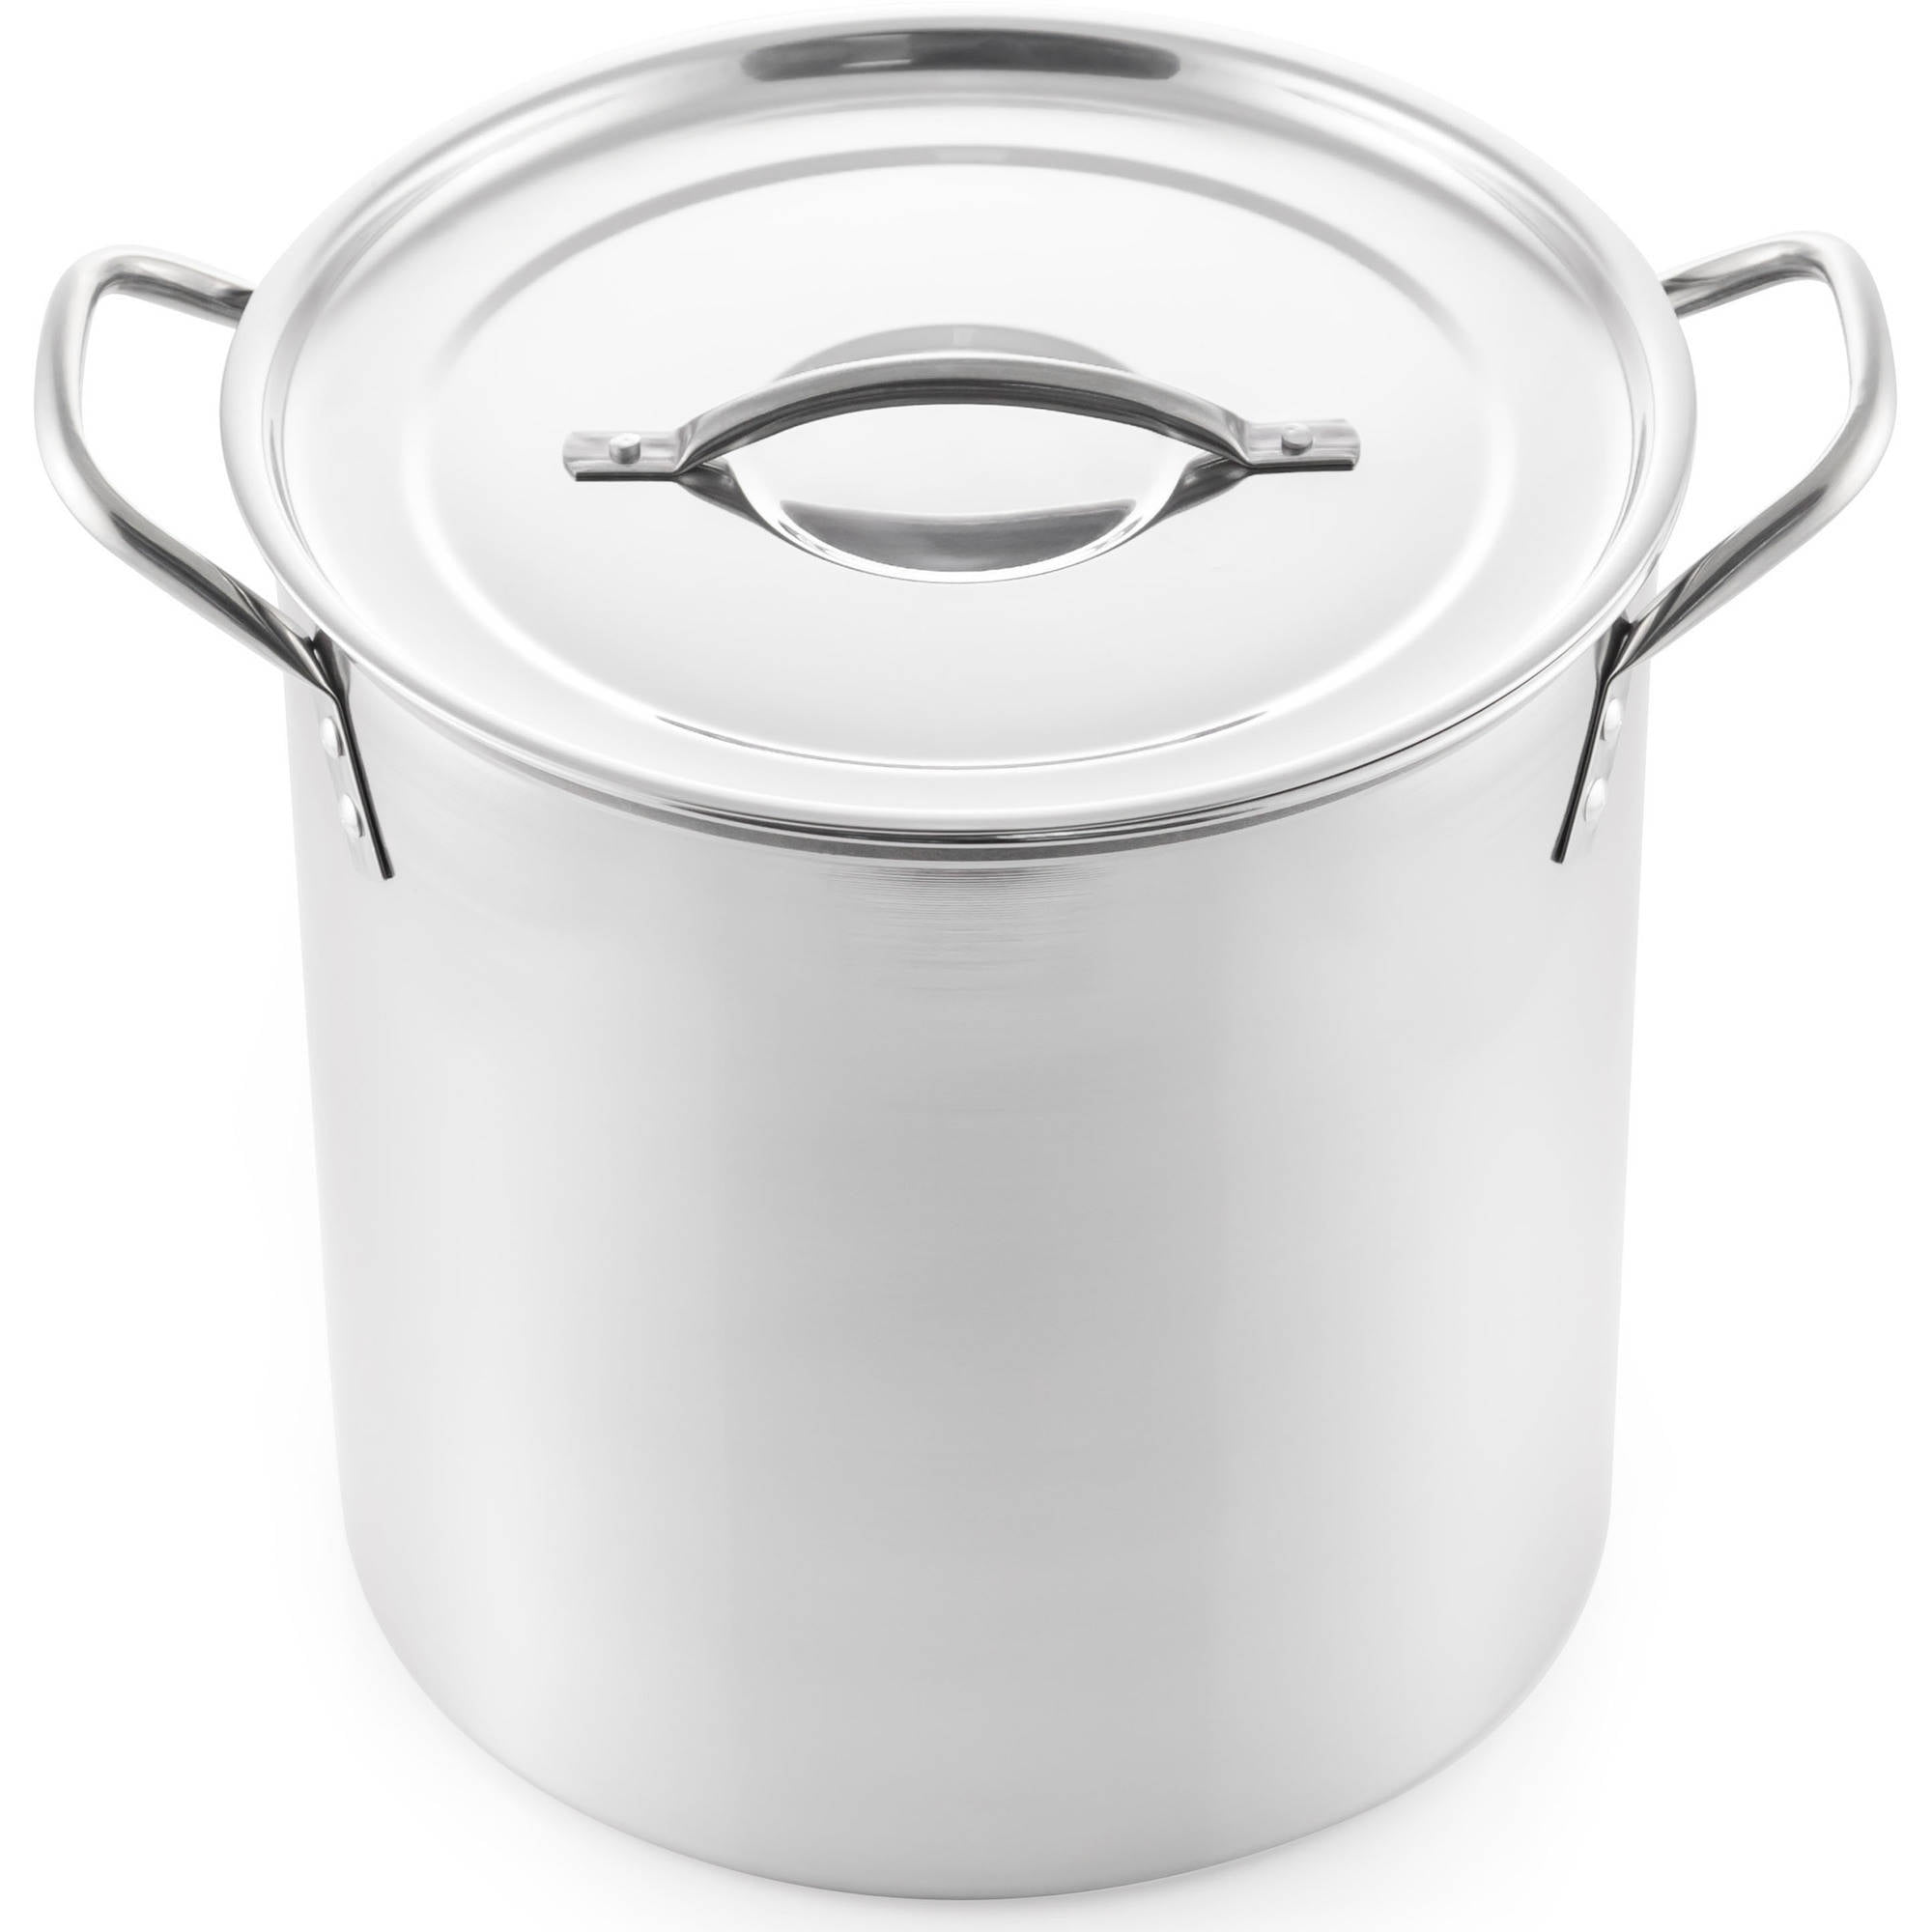 Stainless Steel Stockpot New Calphalon Contemporary 12 qt 